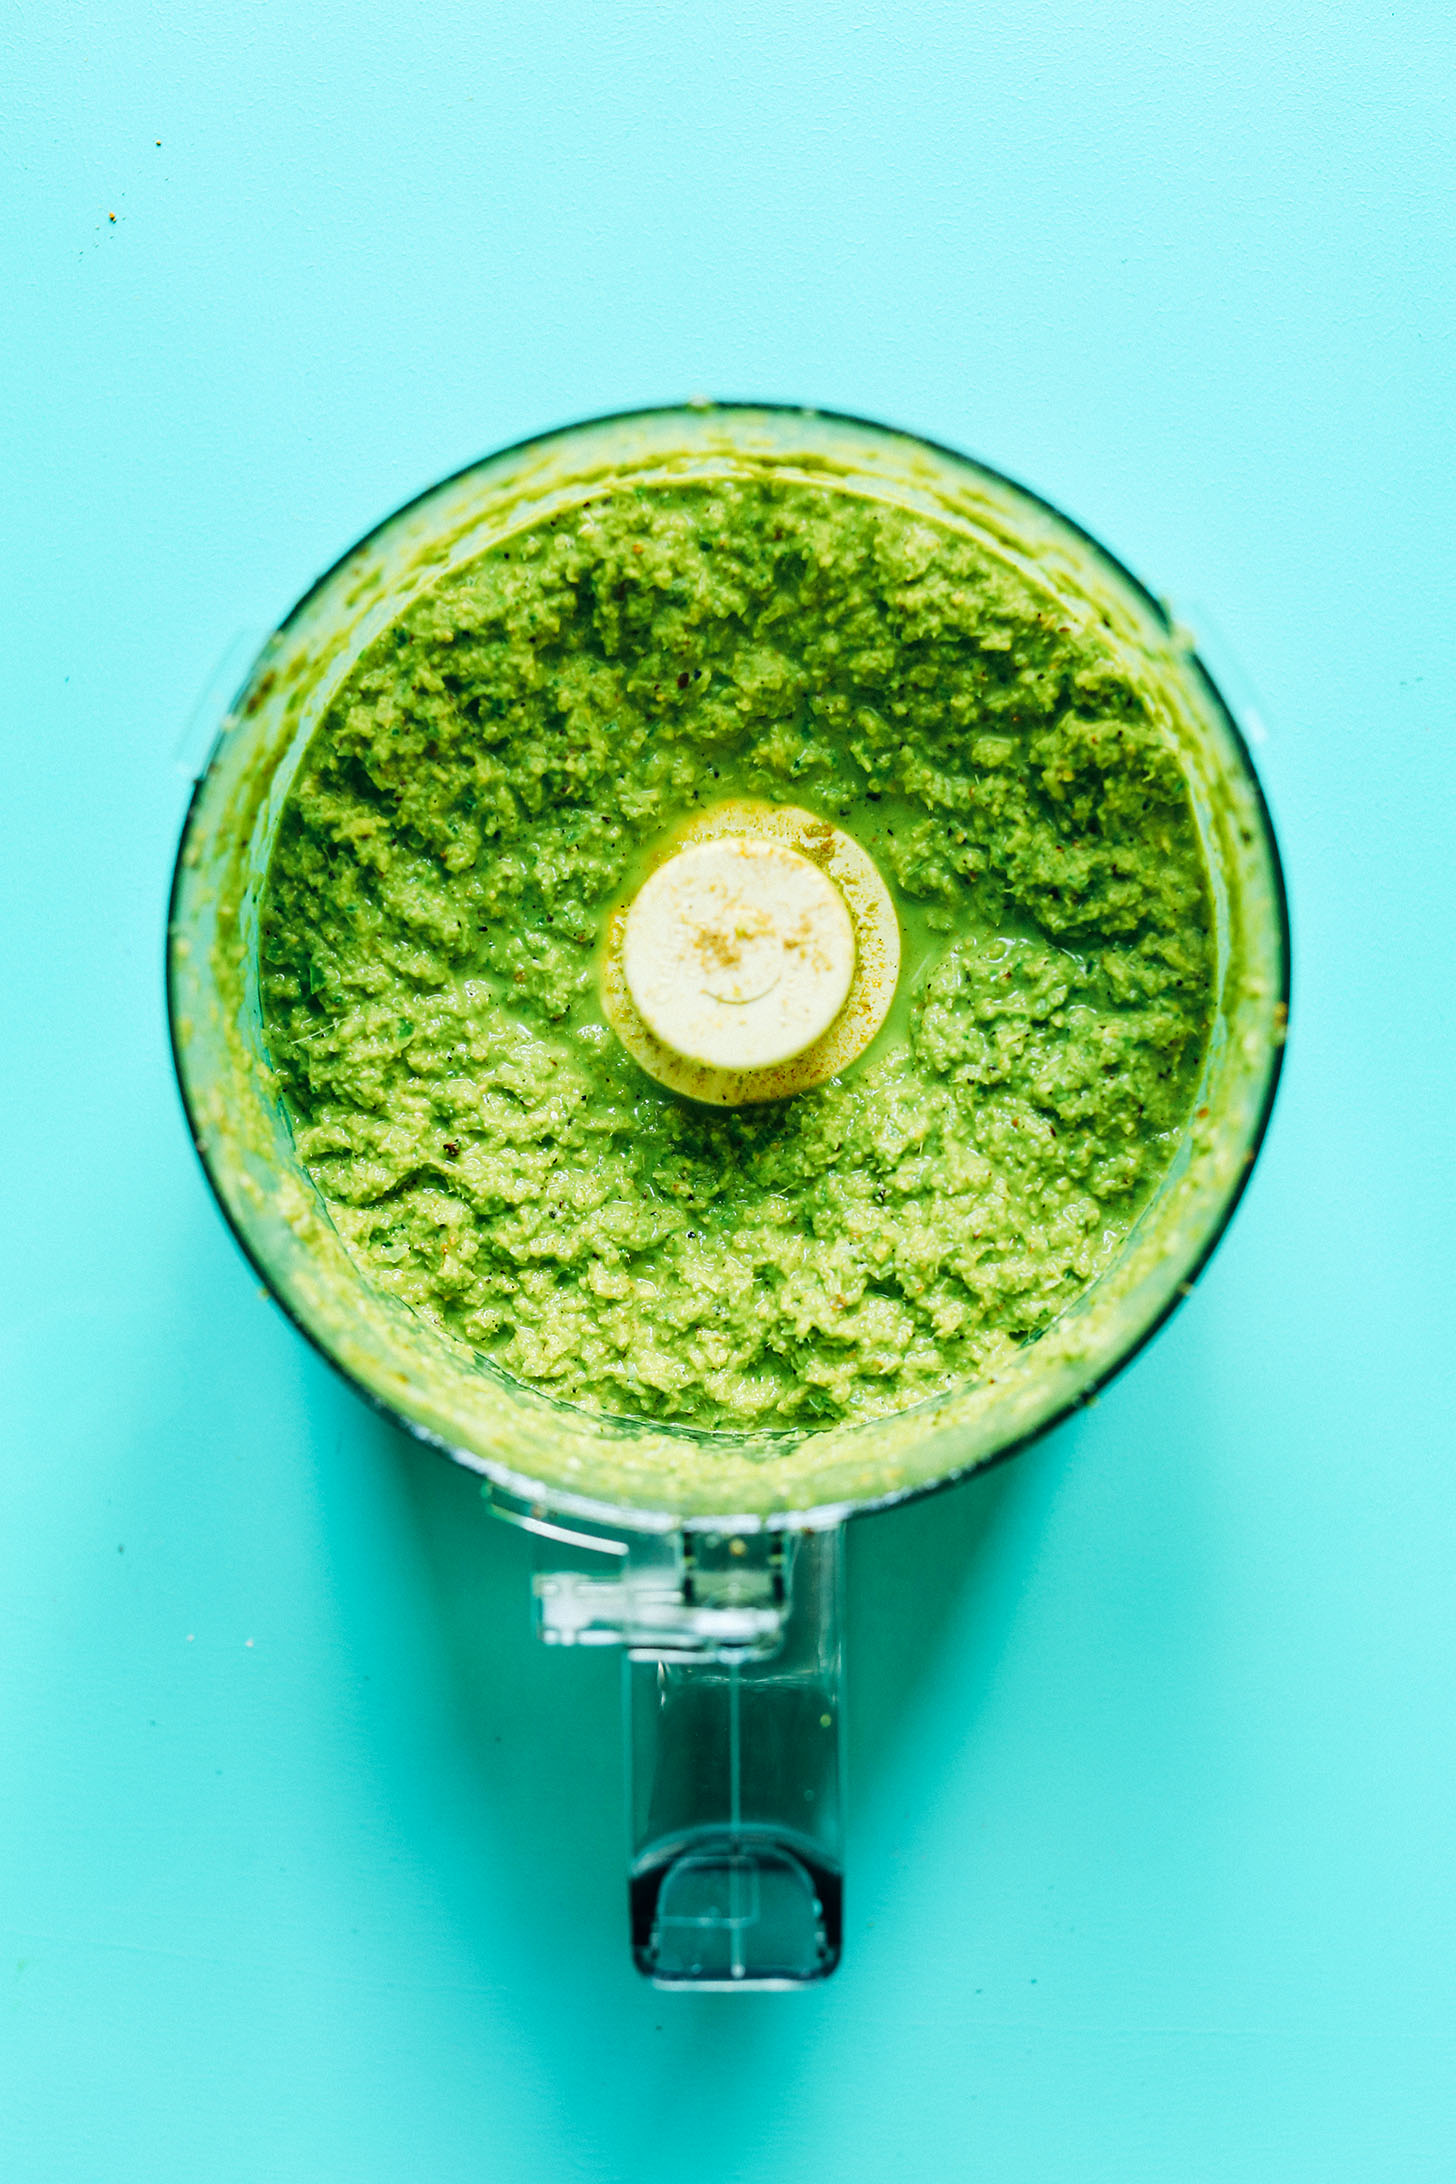 Food processor with ingredients for our gluten-free vegan Green Curry Paste recipe